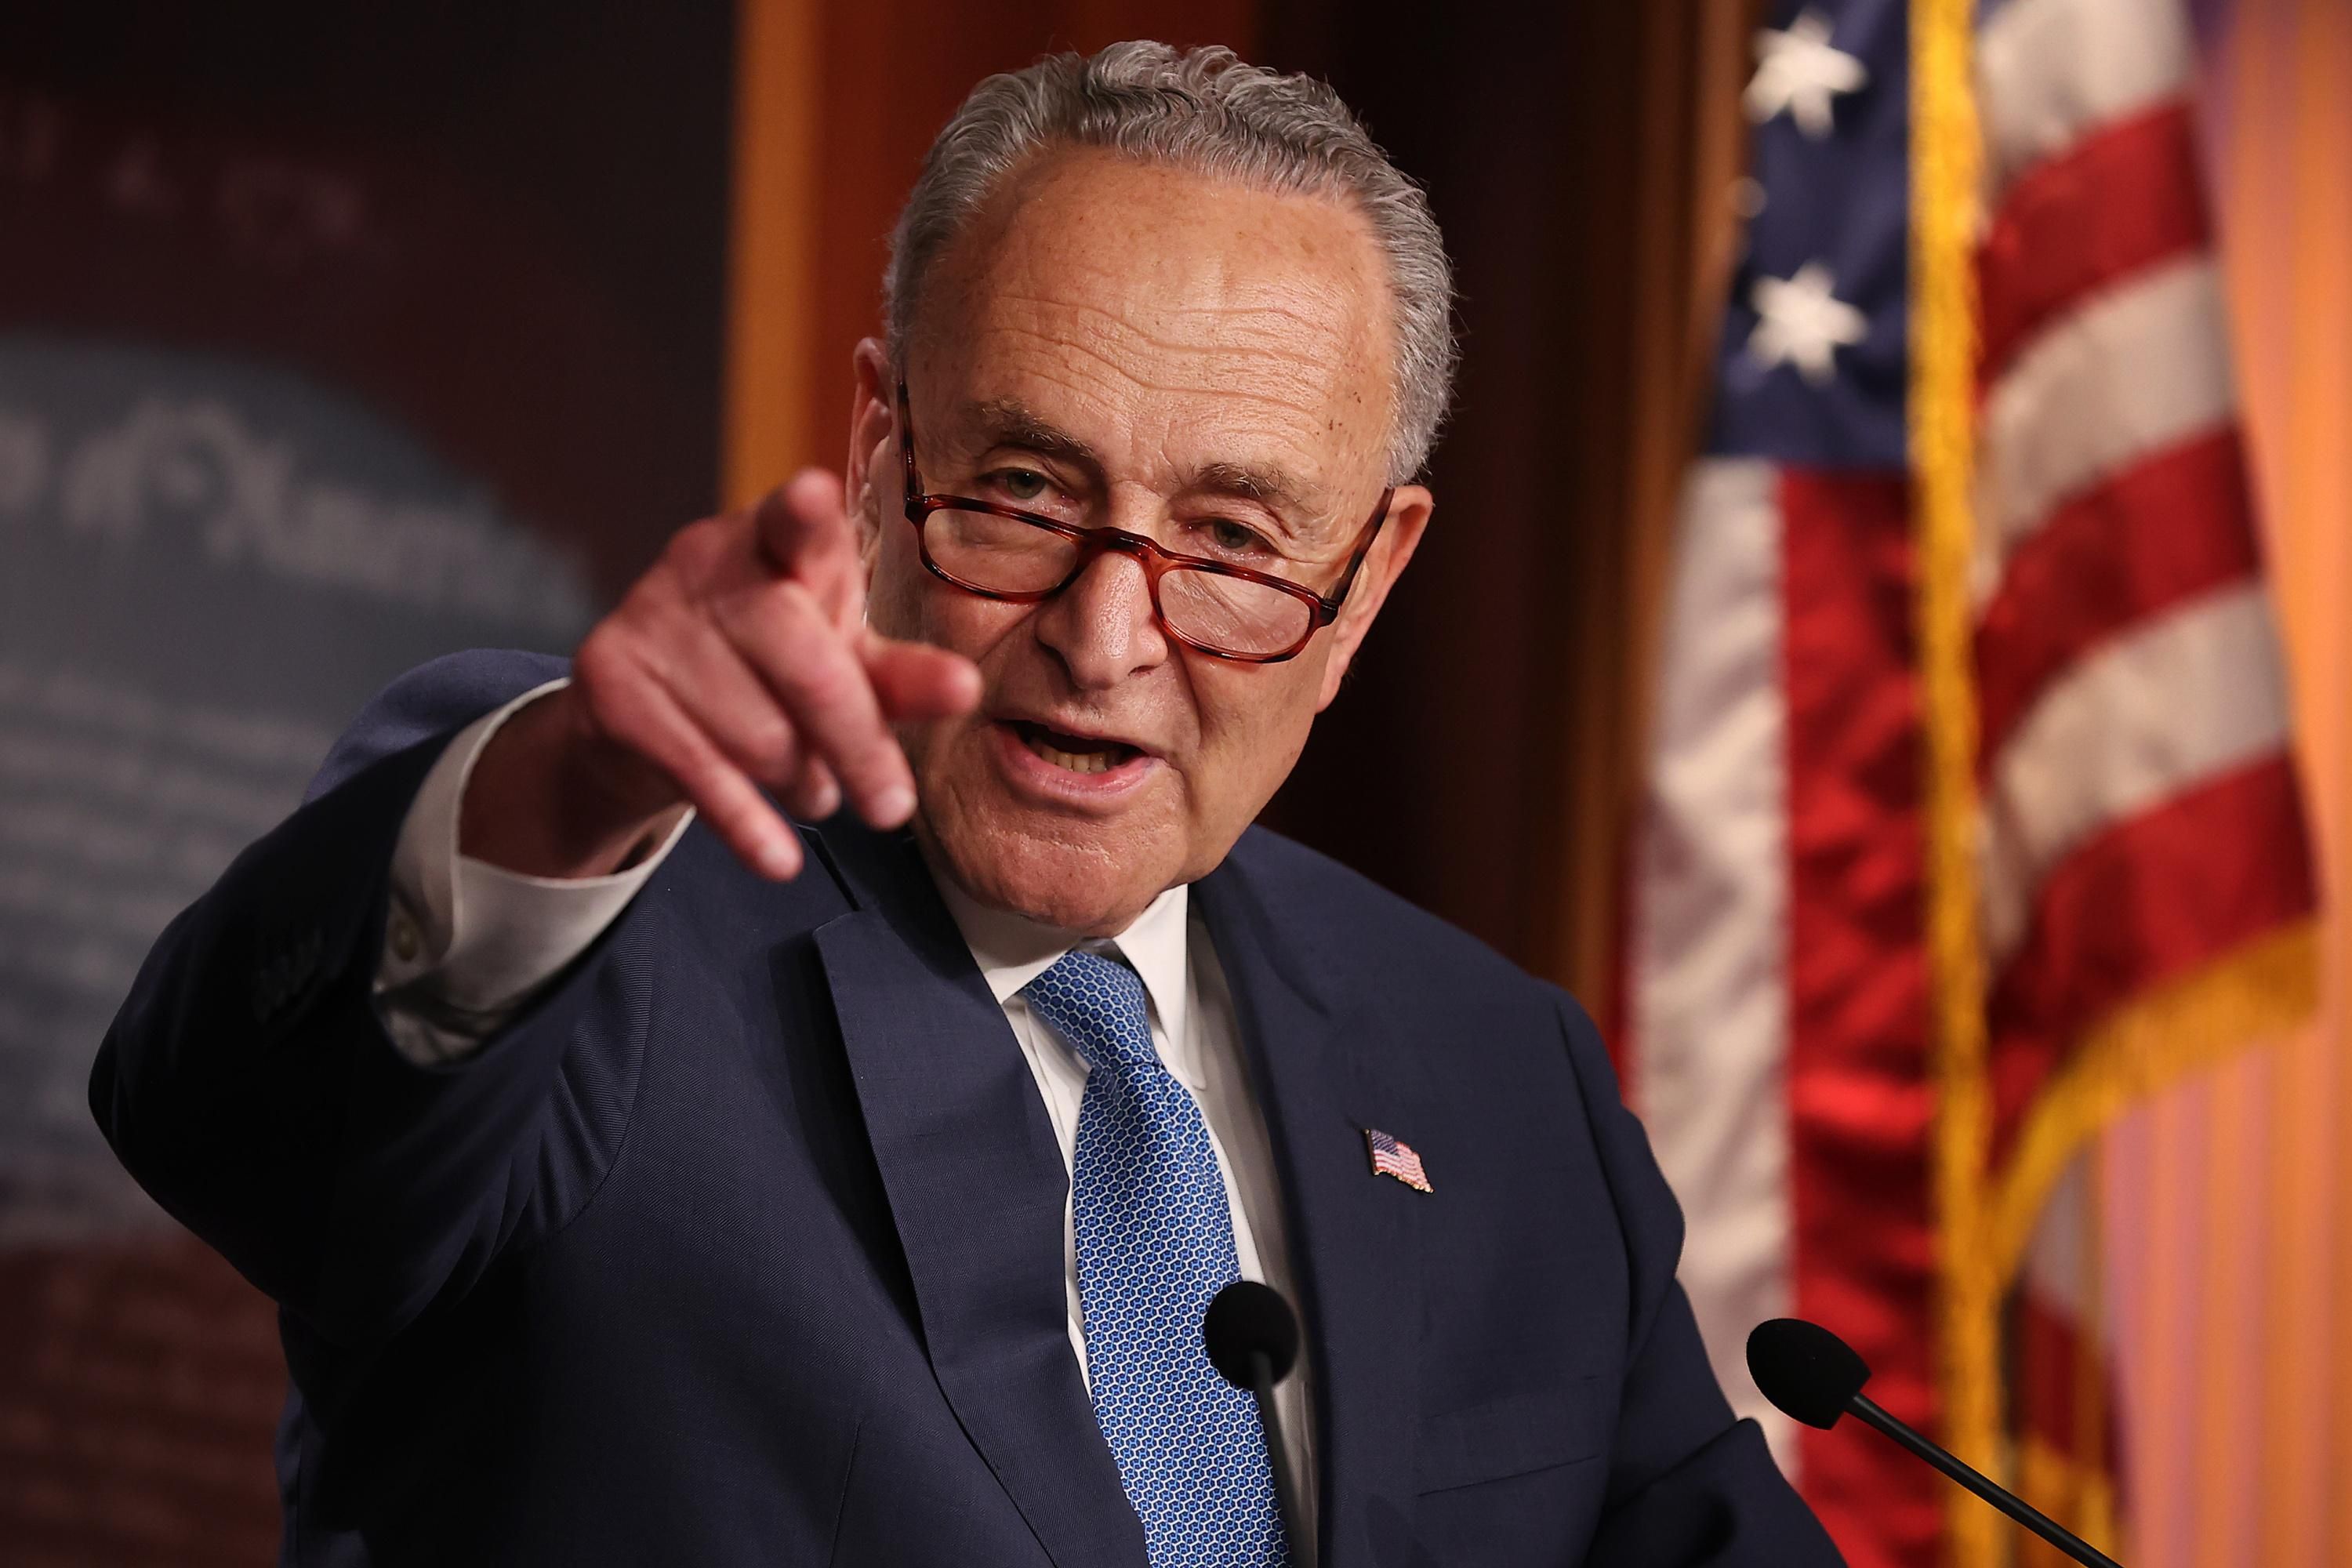 Senate Majority Leader Chuck Schumer (D-N.Y.) talks to reporters after the Senate voted against the formation of an independent commission to investigate the attack at the U.S. Capitol on May 28, 2021 in Washington, D.C. (Photo: Chip Somodevilla via Getty Images)